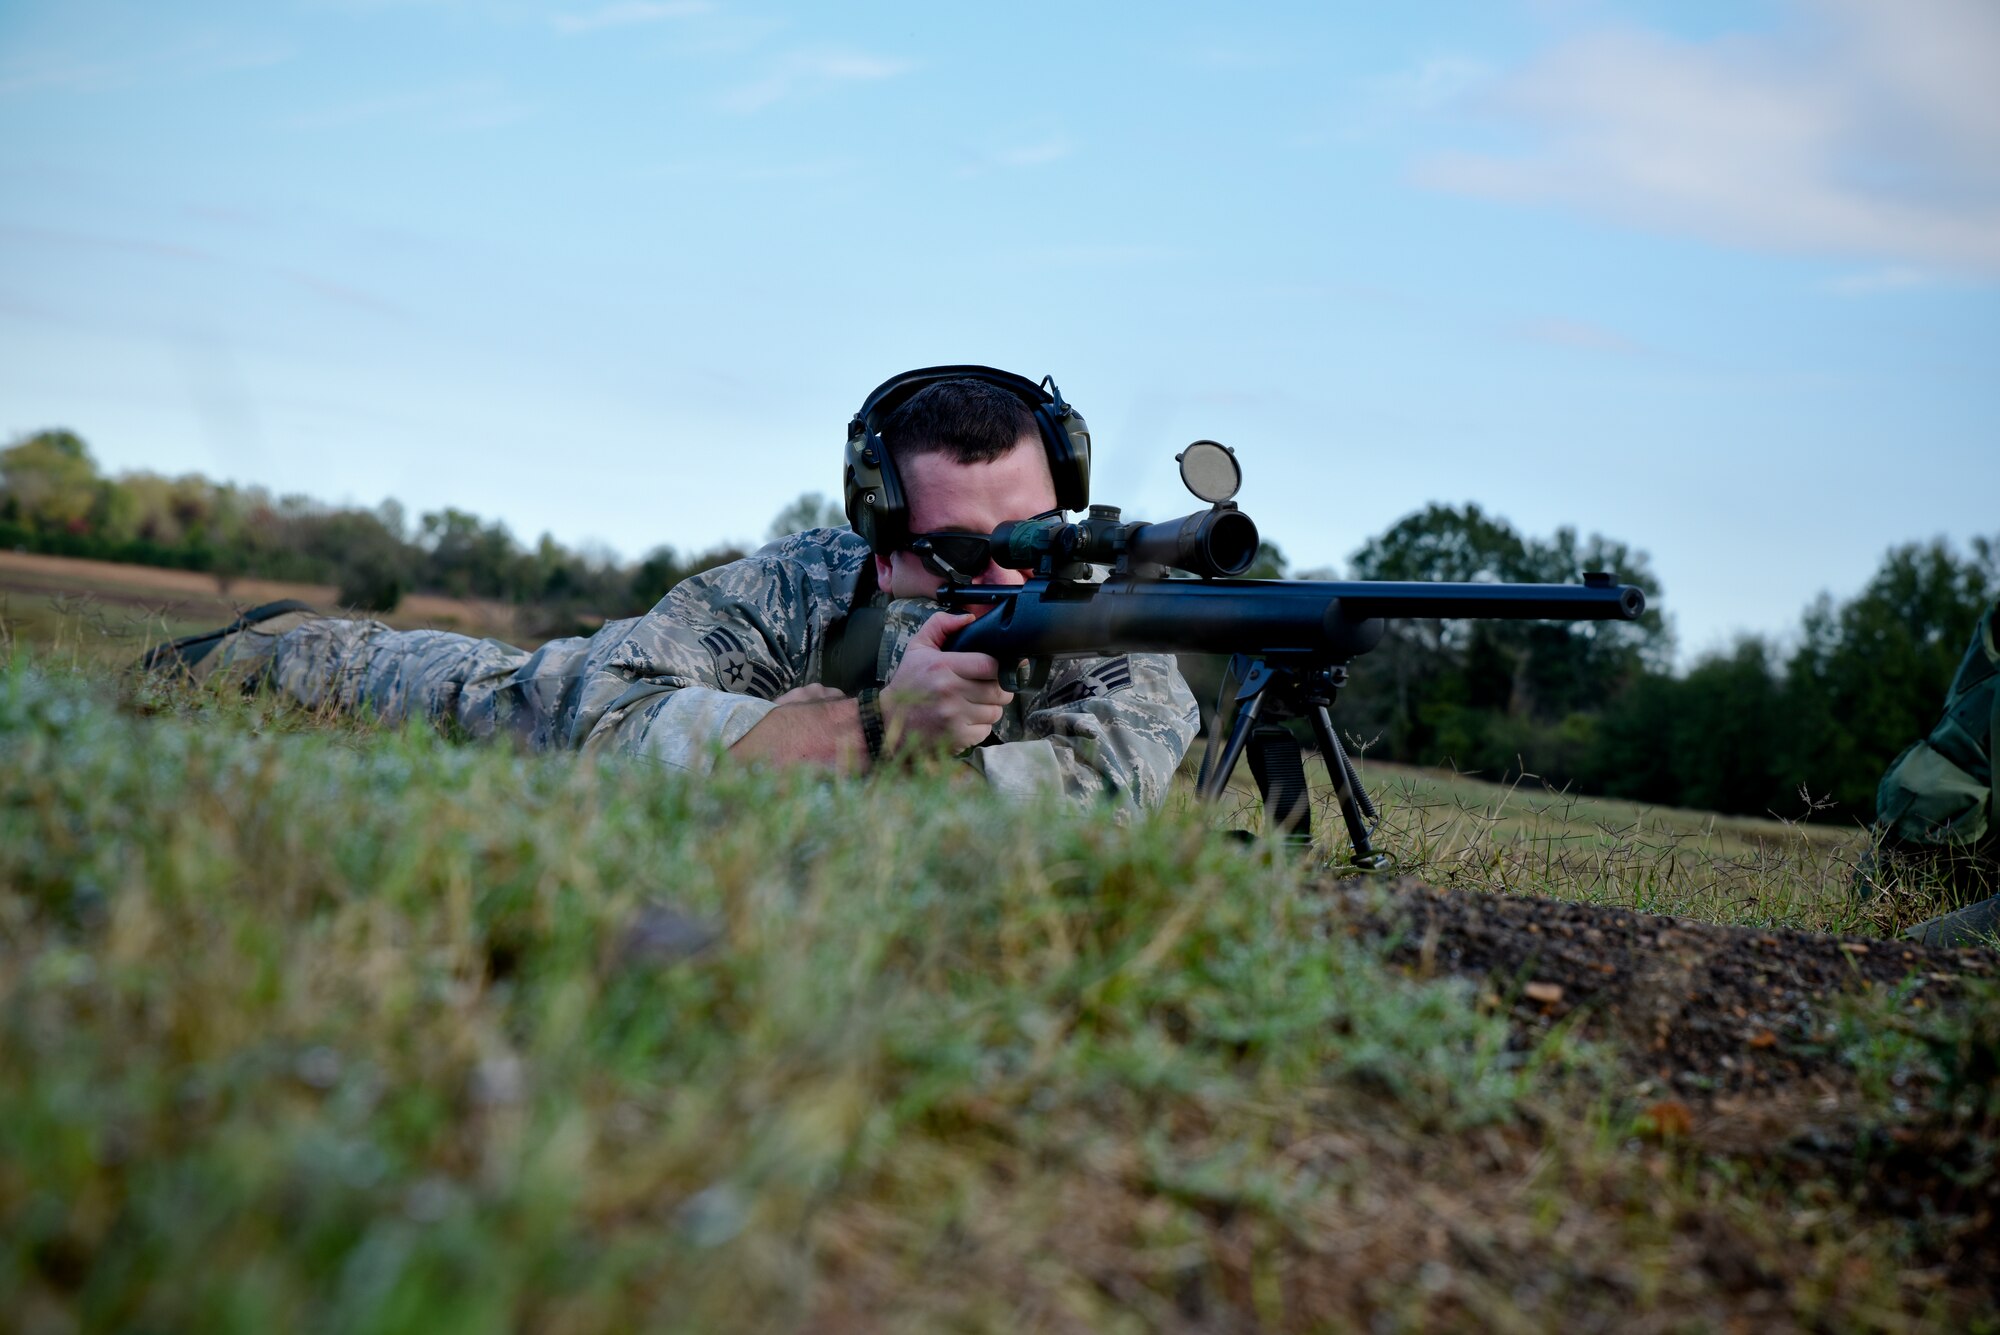 Senior Airman Corey Smith of the 188th Security Forces Squadron zeroes in his M-24 rifle during known distance sniper and advanced designated marksman qualification Nov. 6, 2015 at Fort Chaffee Joint Maneuver Training Center, Ark. The 188th SFS maintains combat readiness and efficiency through annual training on their designated weapons systems which allows them to remain proficient as marksmen. The training consisted of qualifications at 100, 300, 400, and 500 yards and with moving targets at designated distances. (U.S. Air National Guard photo by Capt. Holli Nelson)